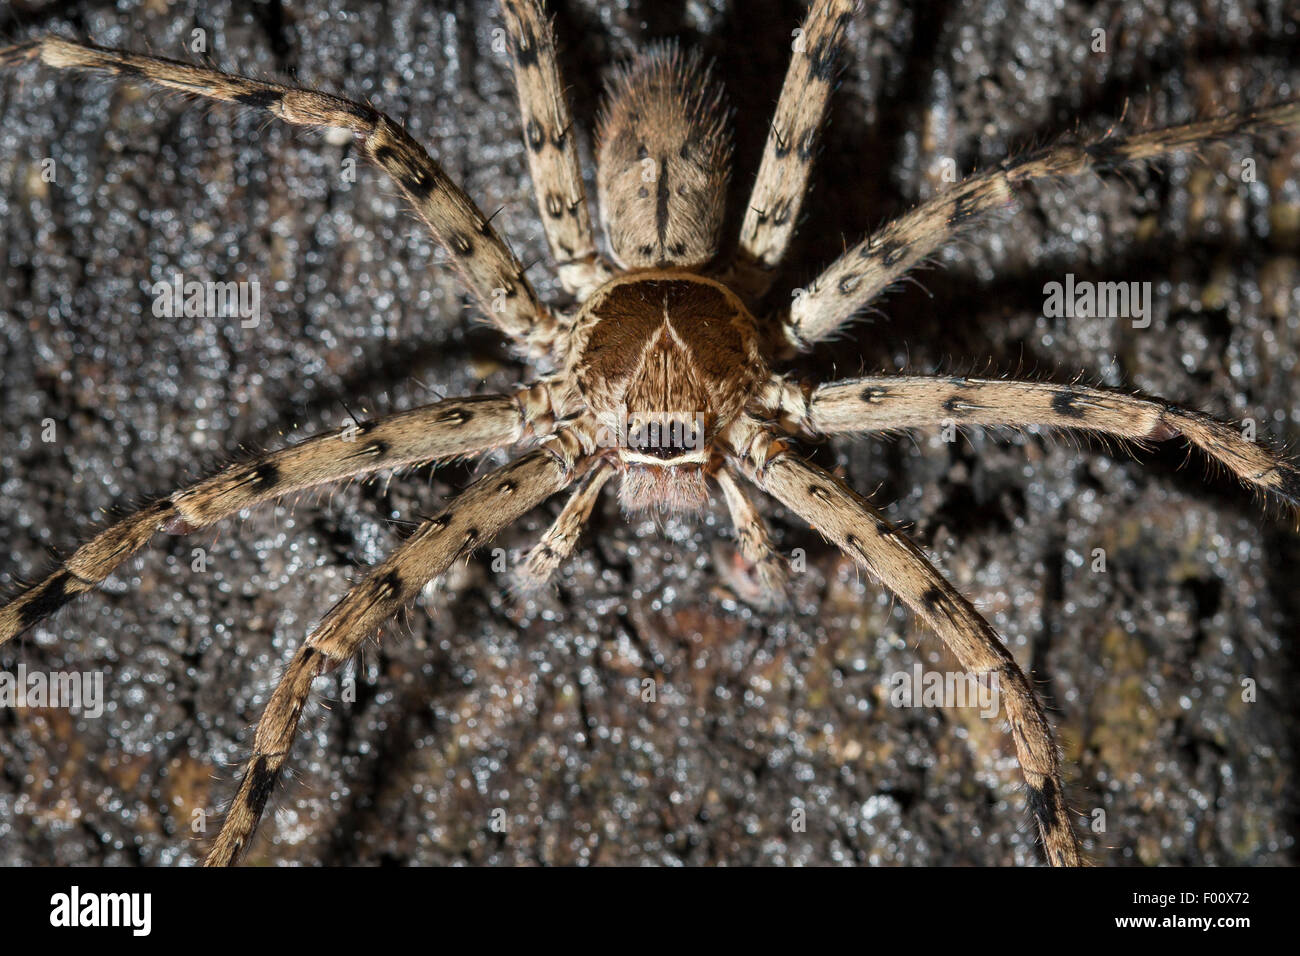 Close-up of a large spider. Stock Photo